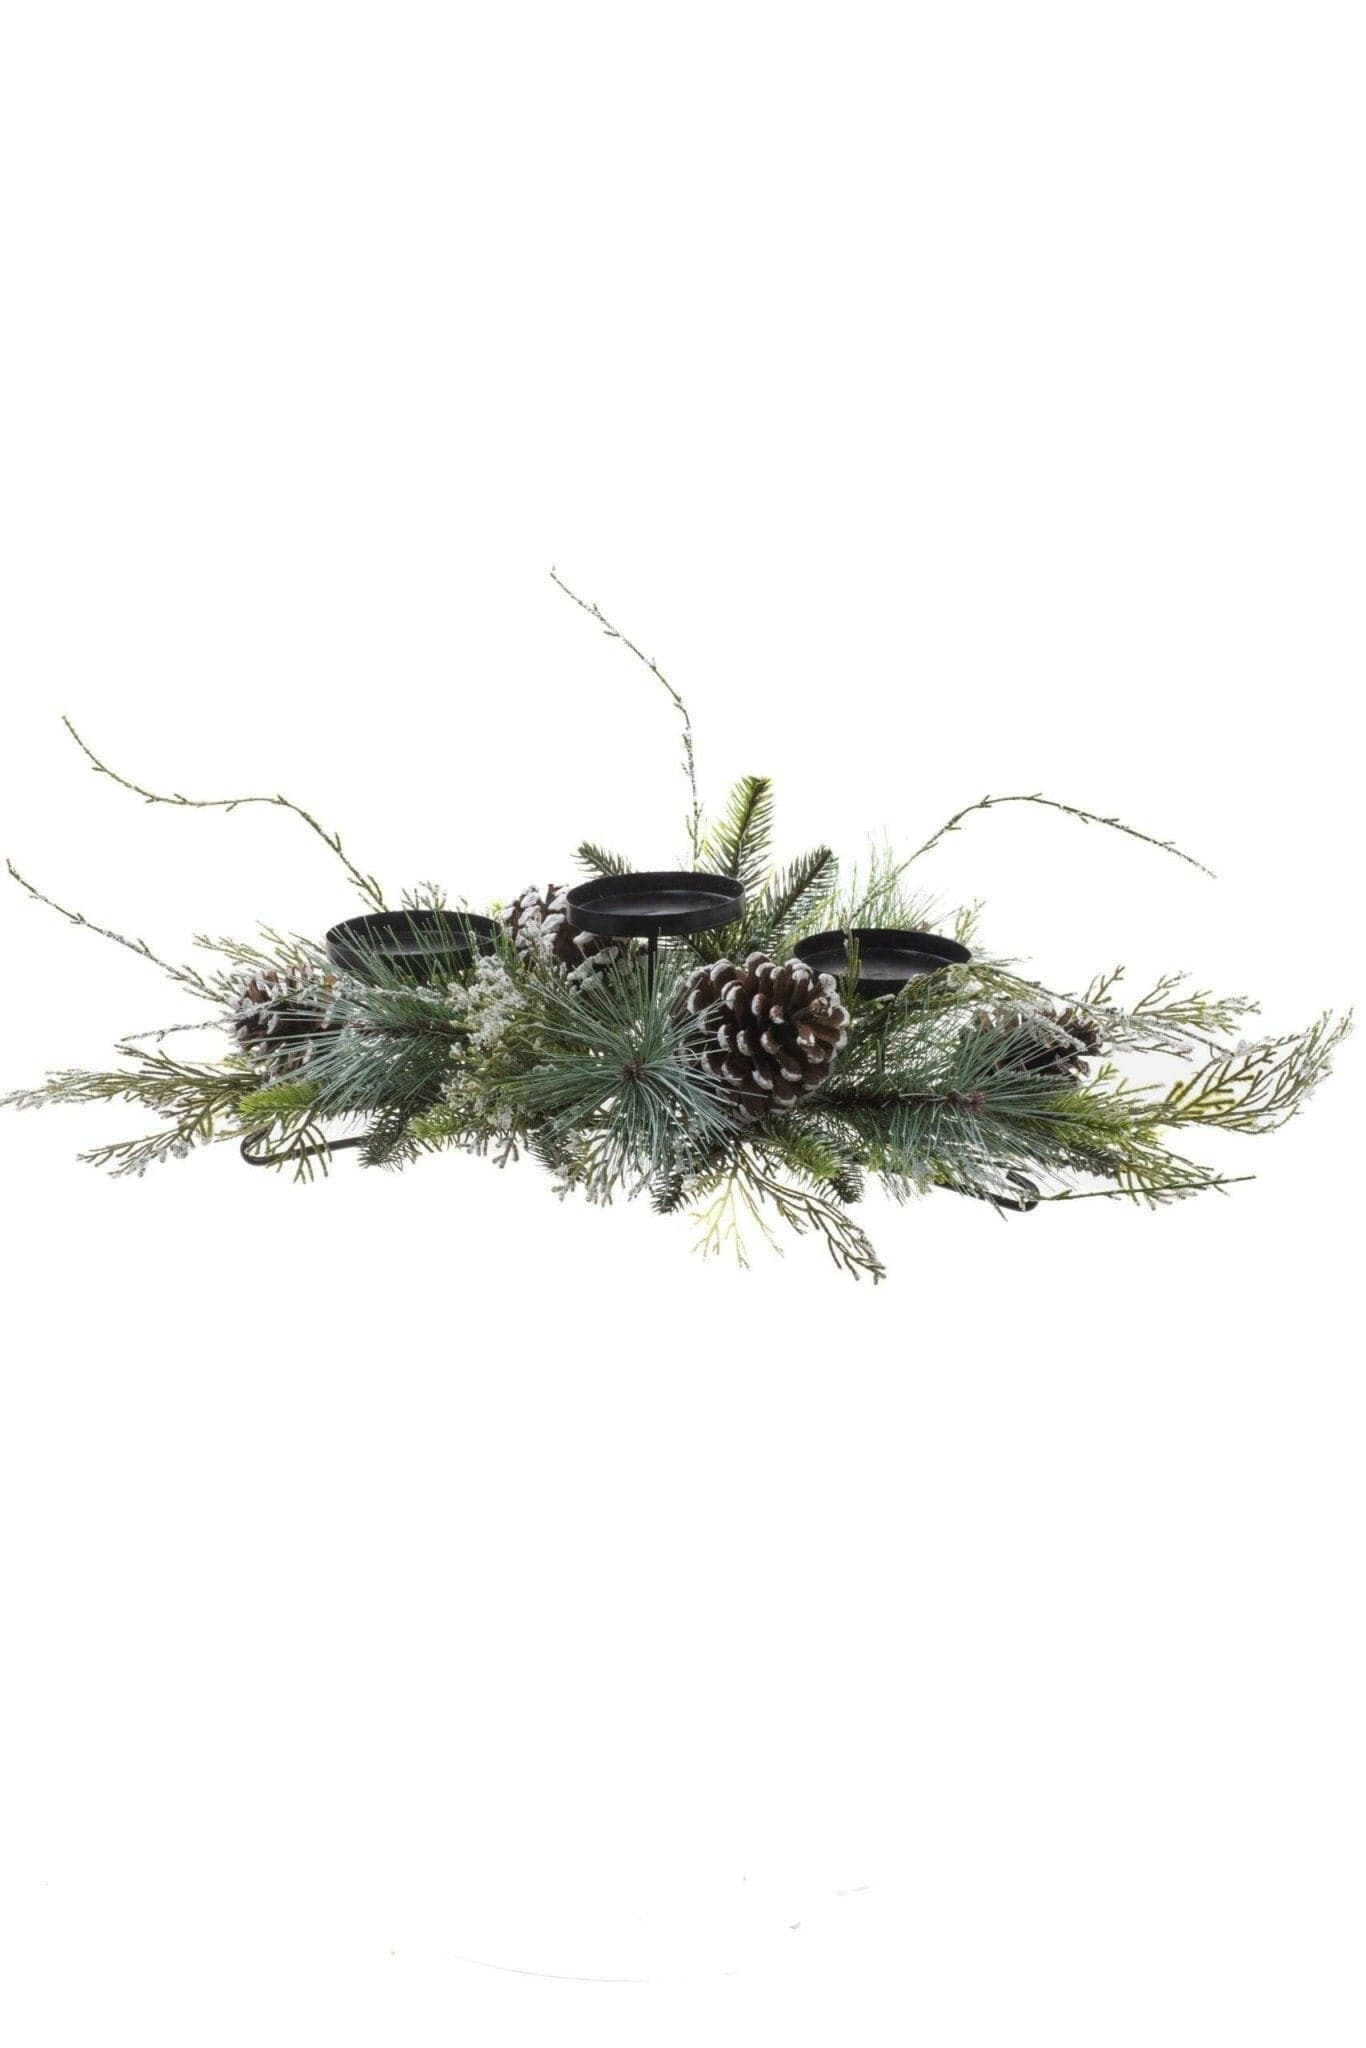 GREEN ICED MIXED PINE CANDLE HOLDER WITH SPROUTING EVERGREEN | Treasures of my HeART